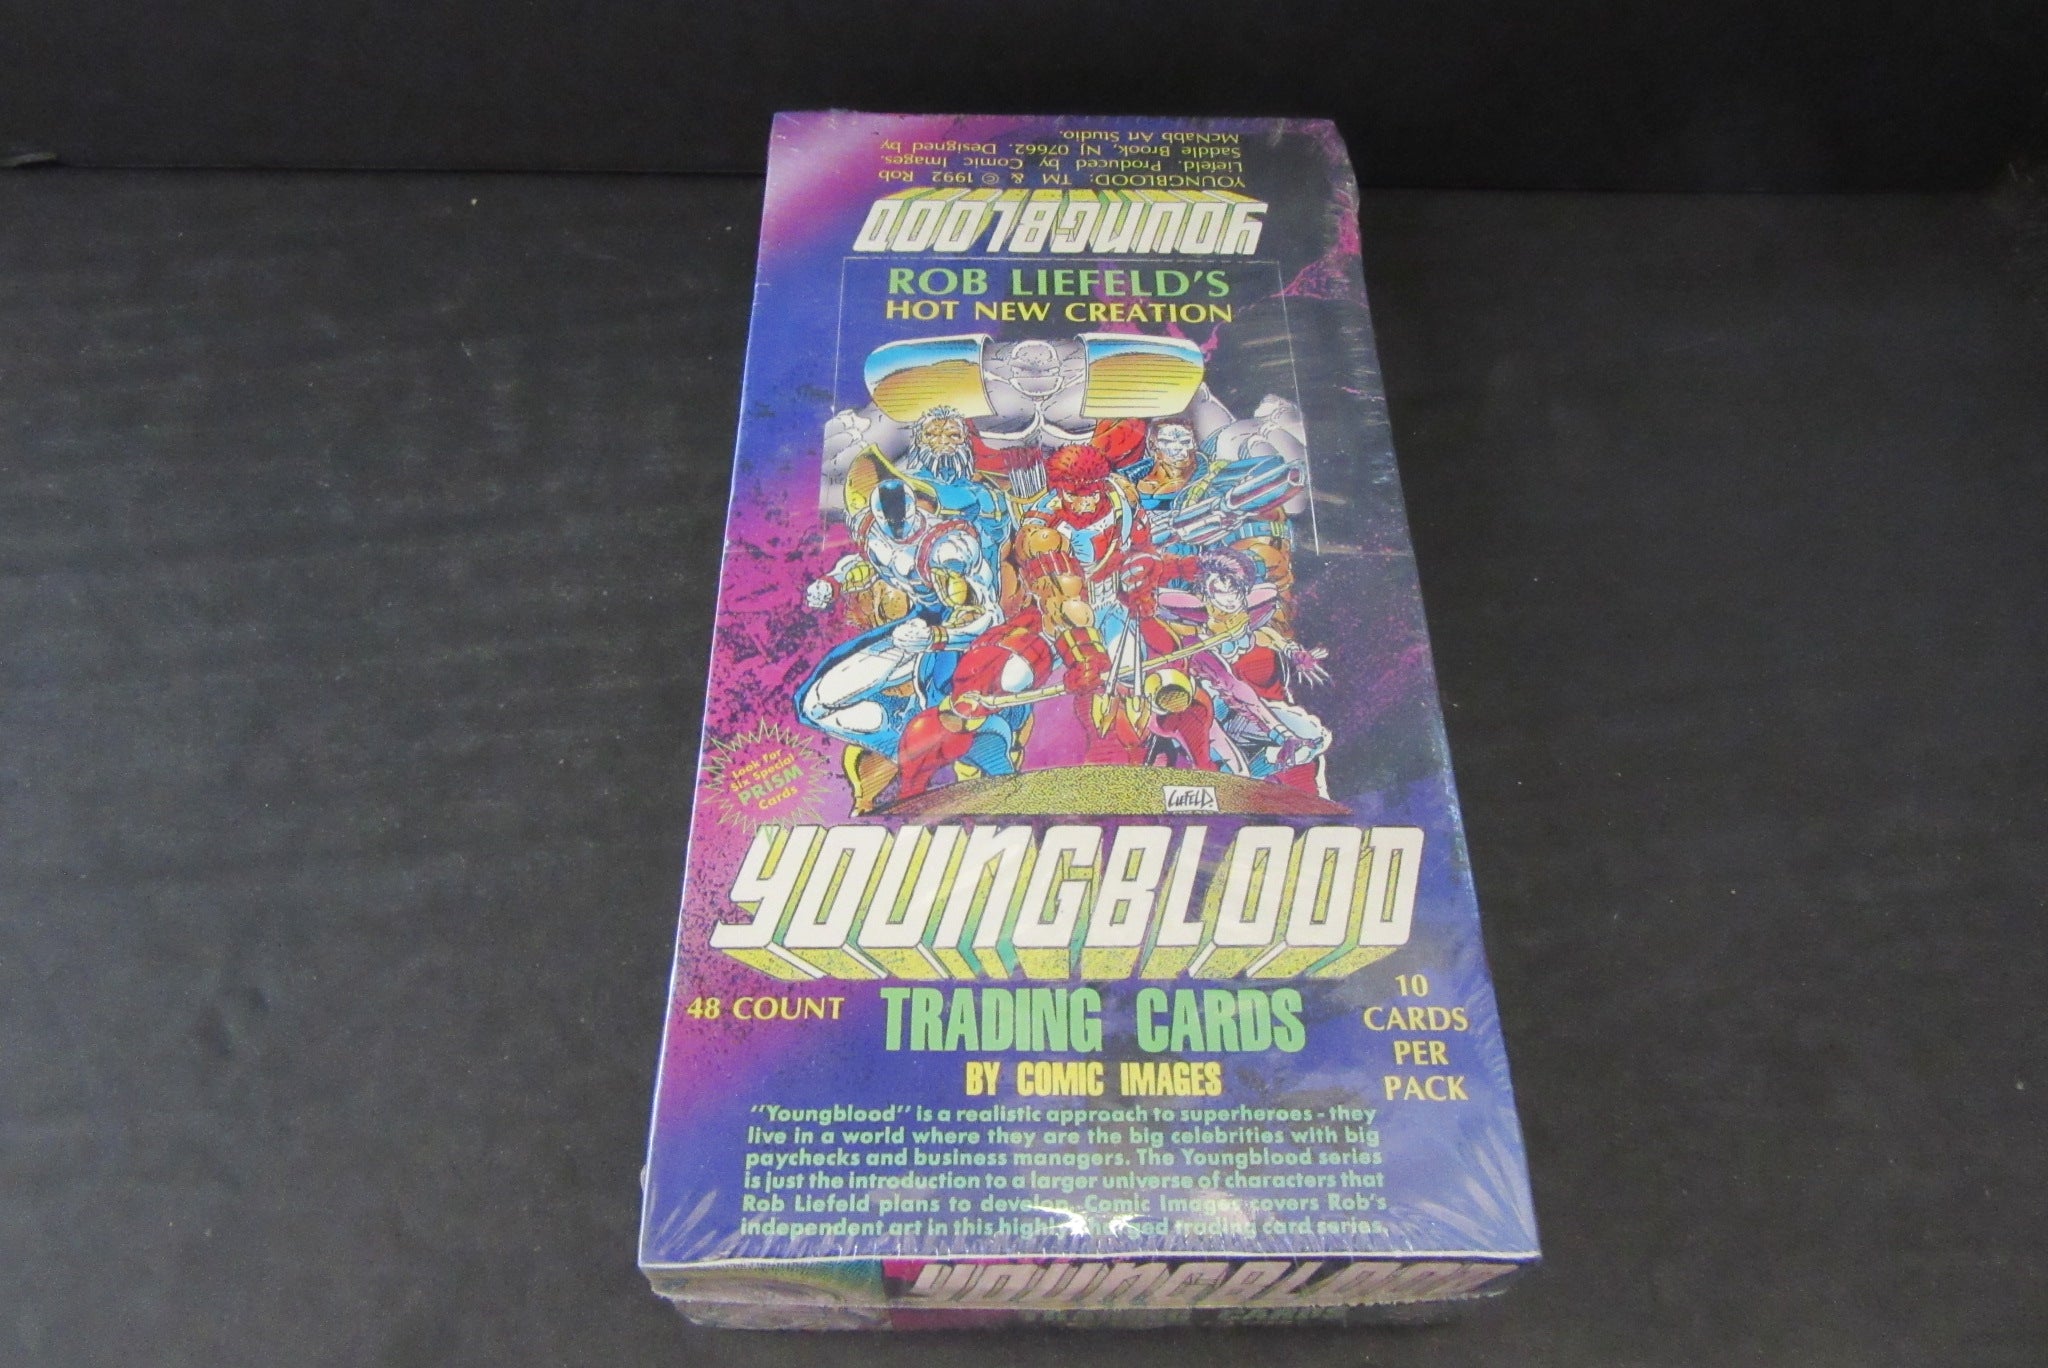 1992 Comic Images Youngblood Trading Cards Box